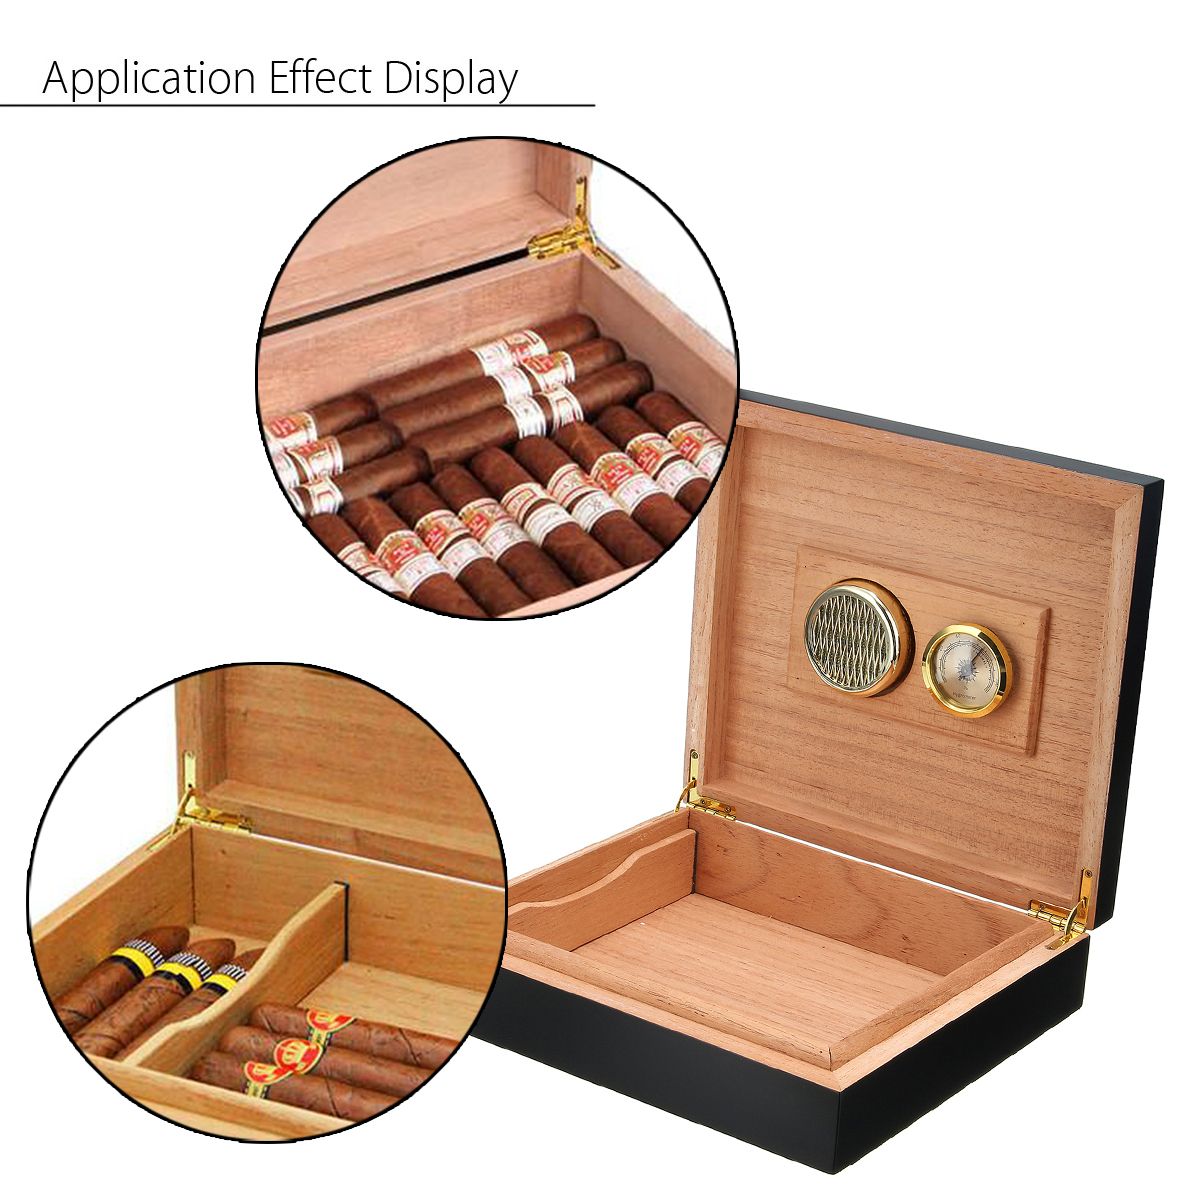 Black-Cedar-Wood-Lined-Cigar-Storage-Box-Humidor-Humidifier-Case-with-Hygrometer-1183222